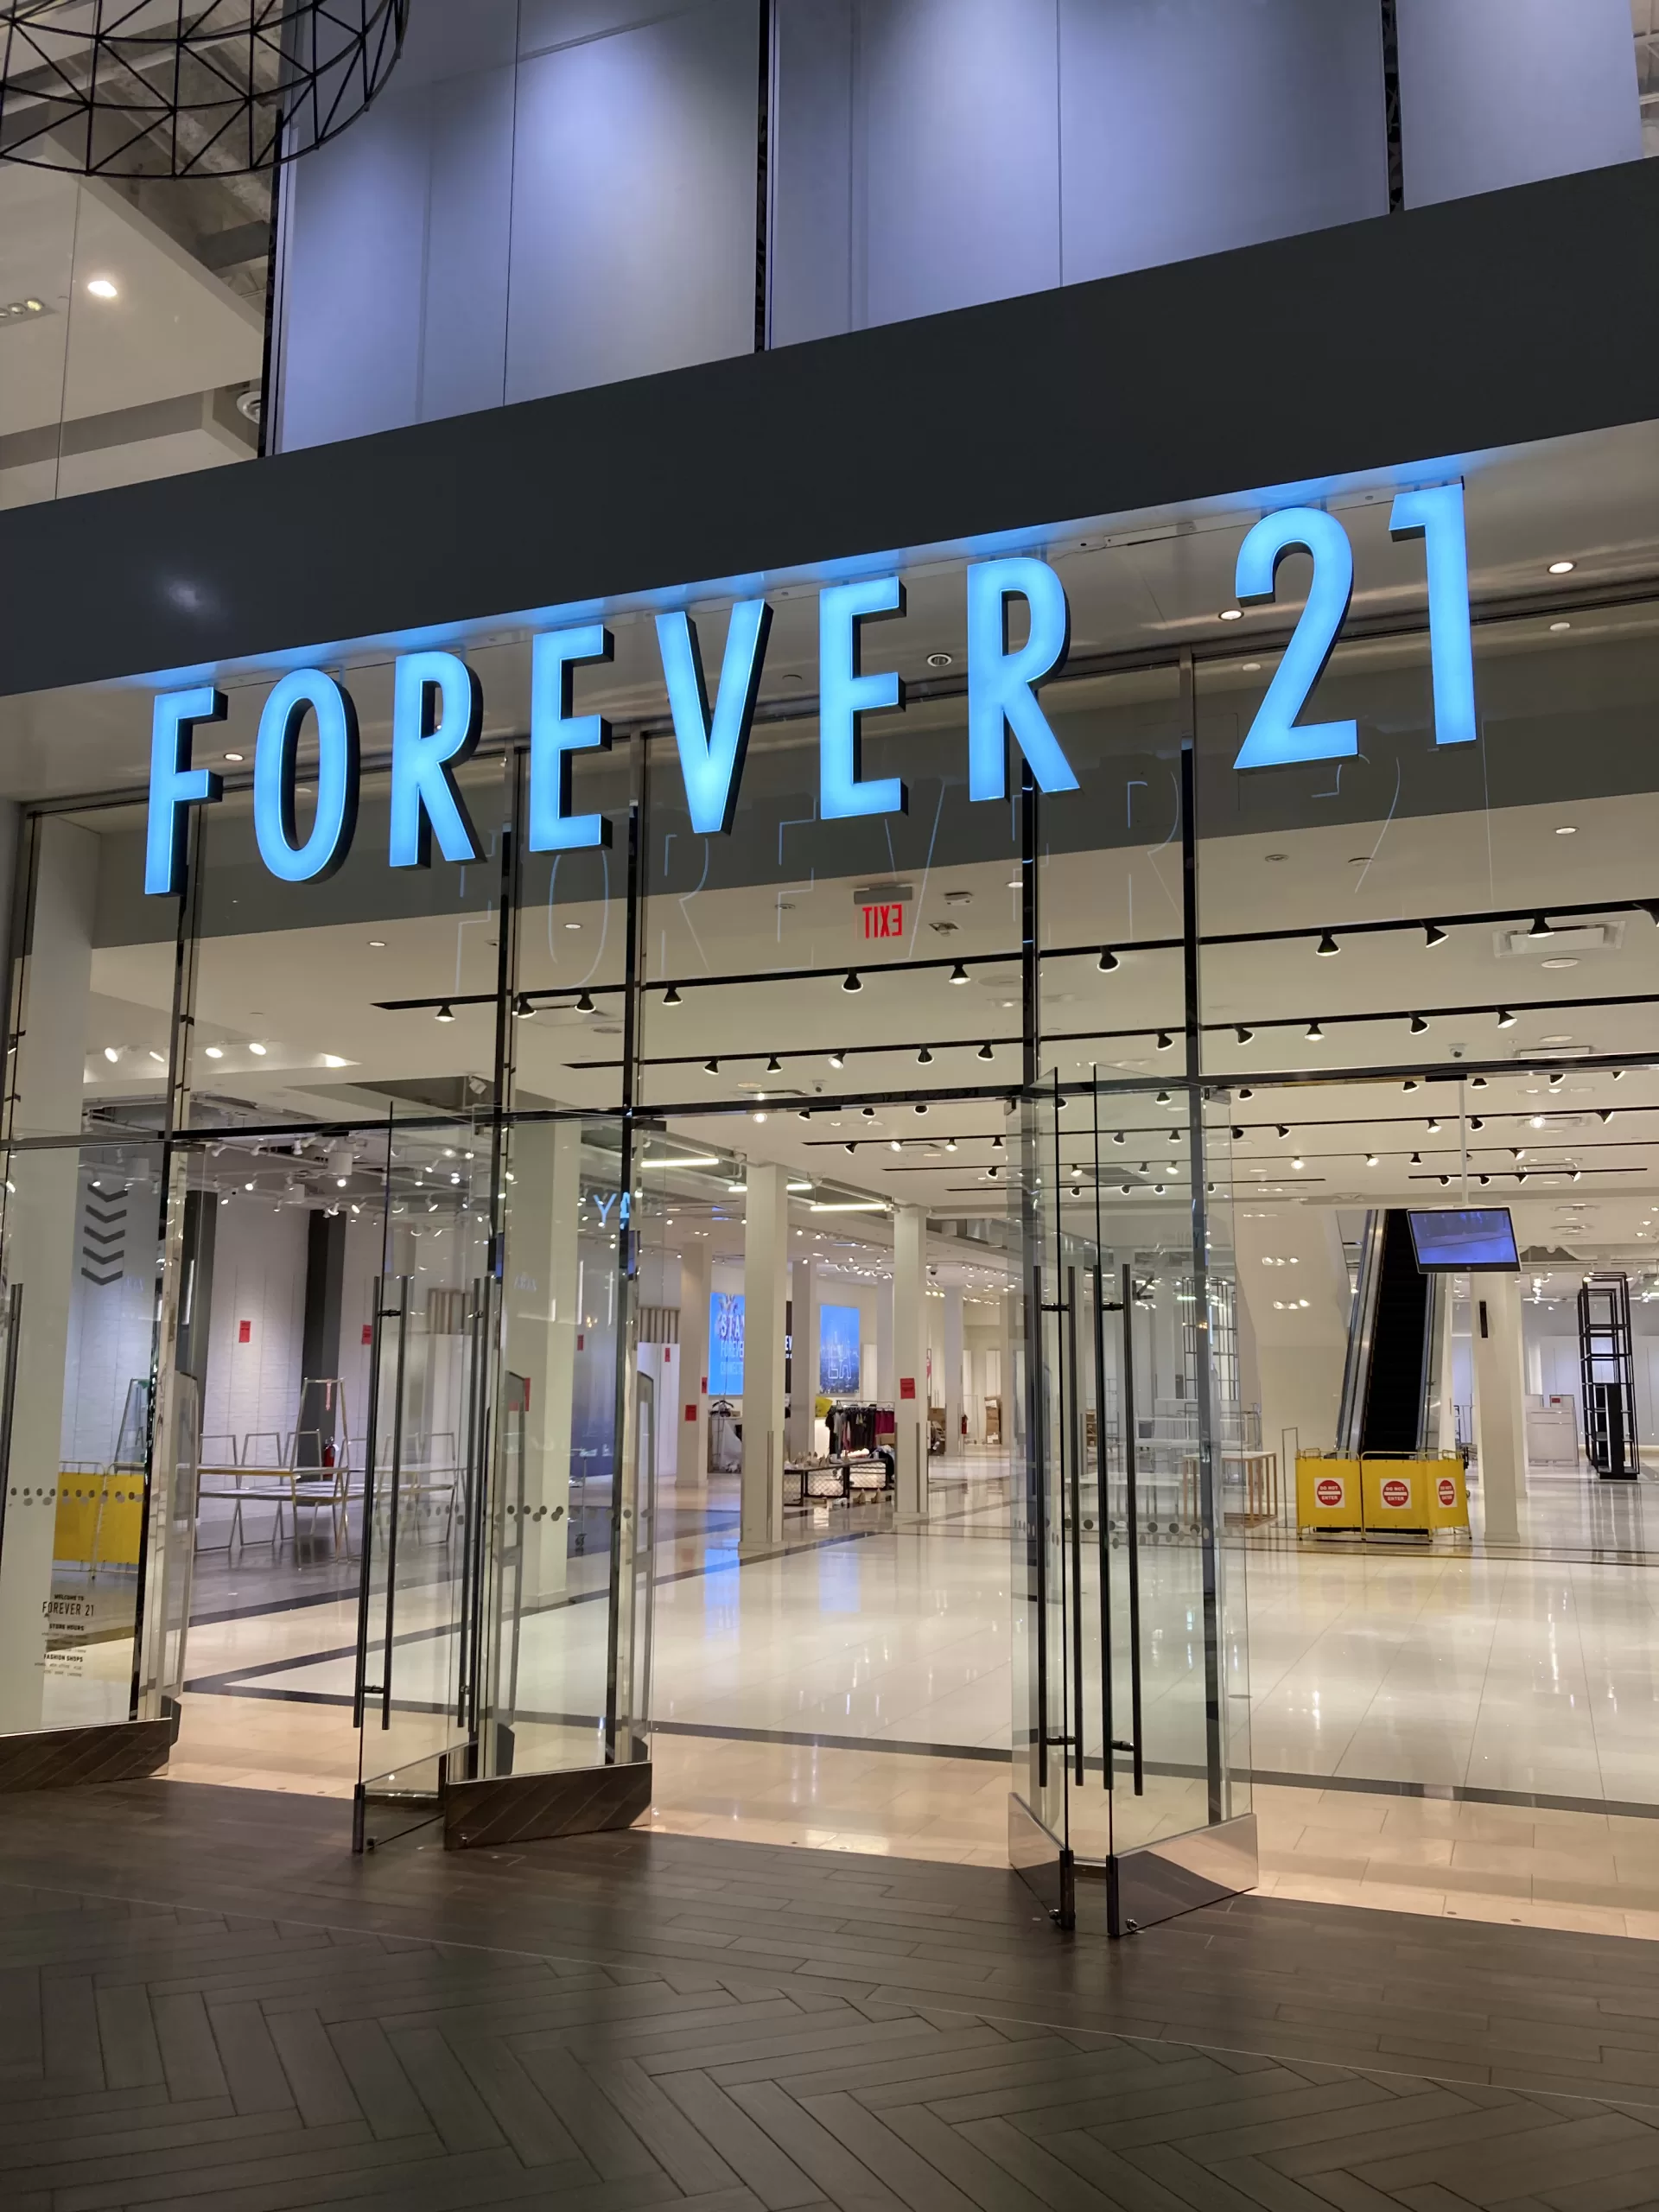 Retail News: Forever 21 closing for Uniqlo's first Houston